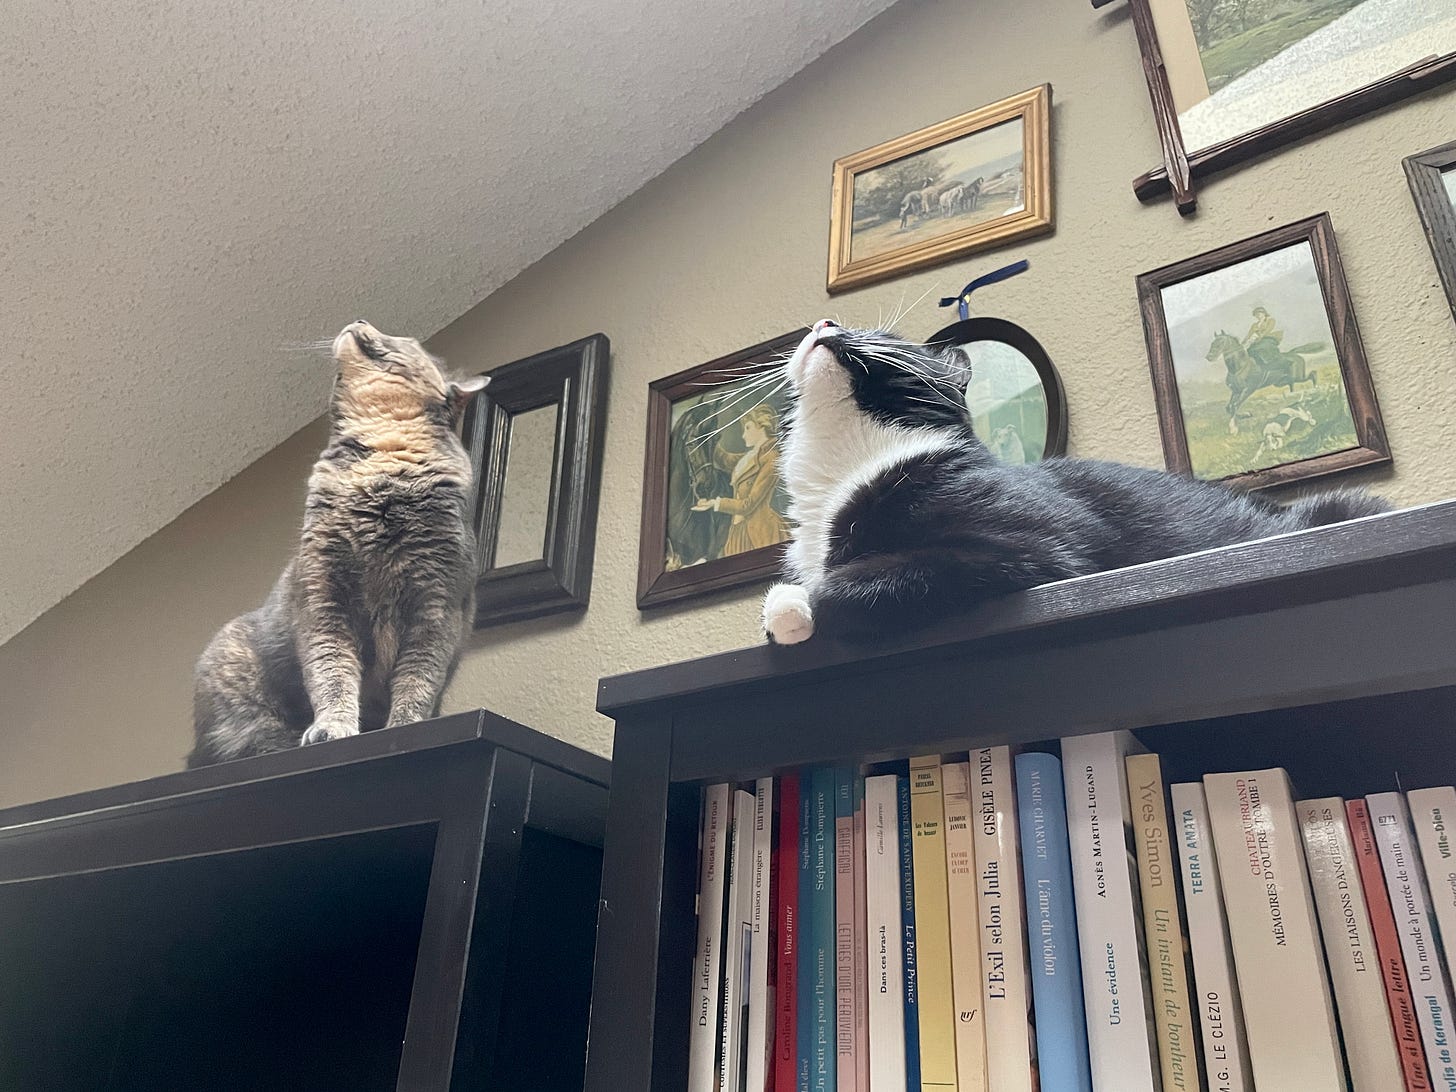 Two cats are on top of a tall black bookcase. On the left stands a dilute tortie; on the right, a tuxedo cat is sitting like a loaf. Both are looking upward toward a light source, and since they are photographed from below, all that is visible of their faces is their chins.